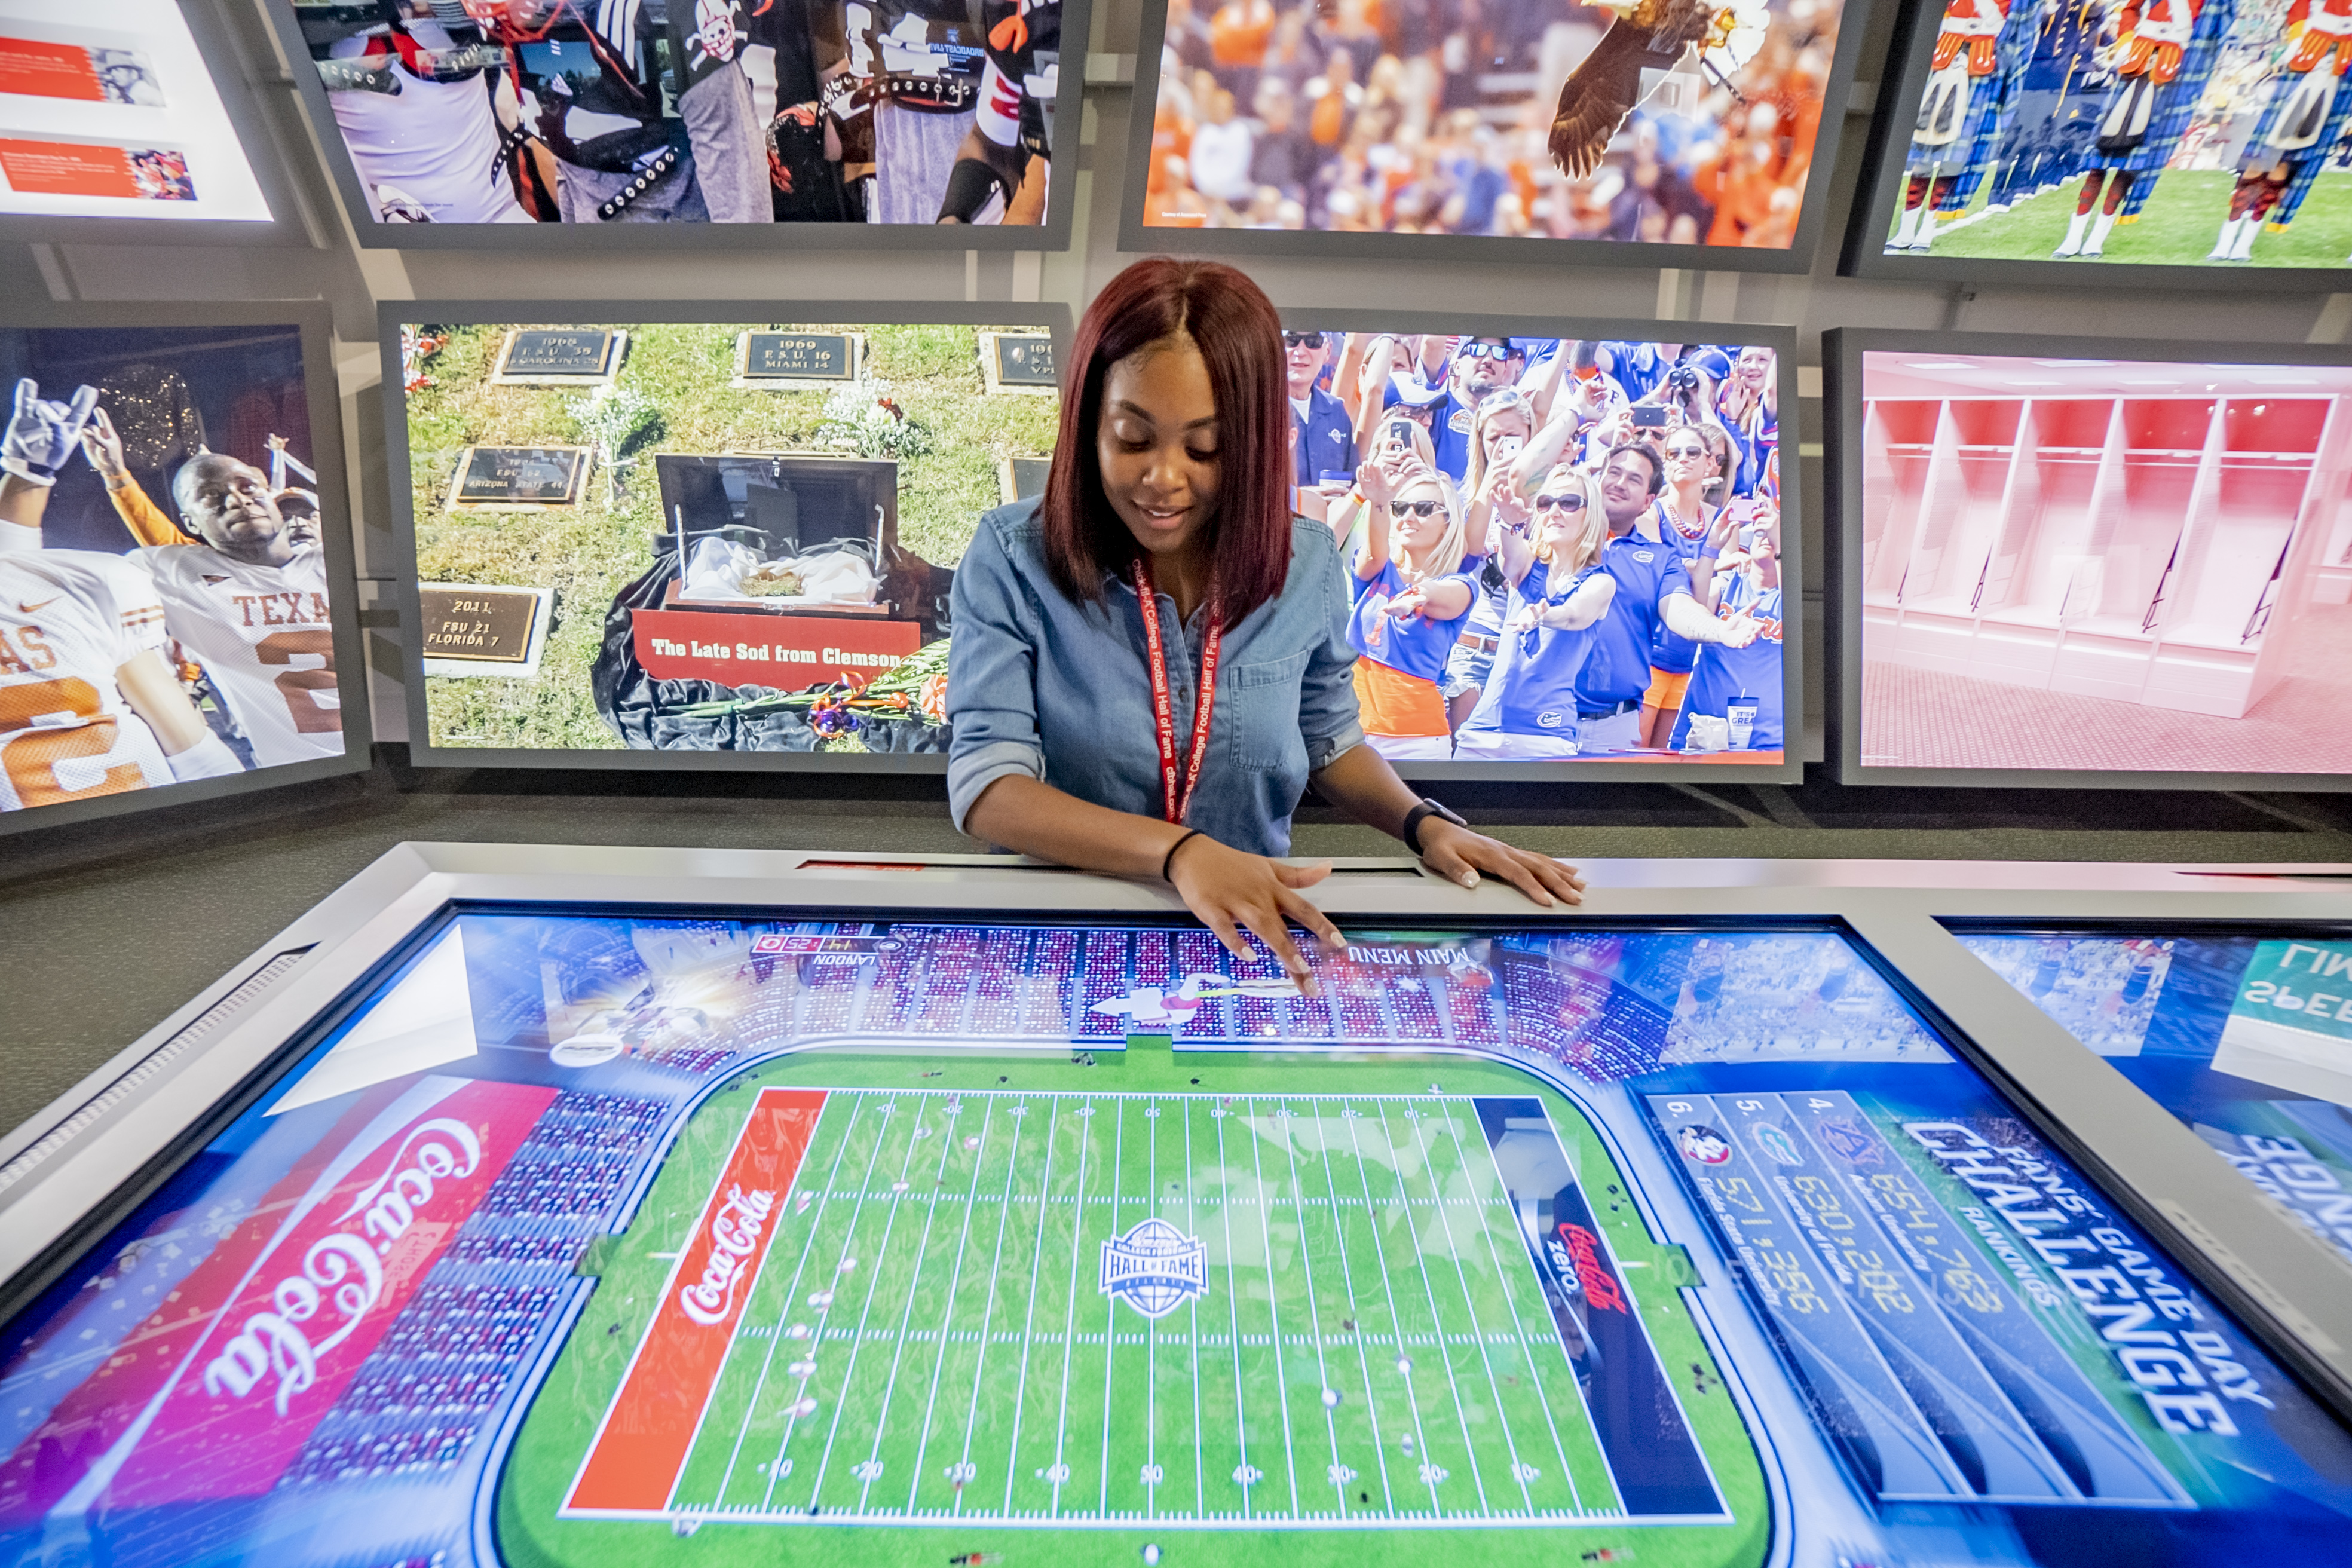 College Football Hall of Fame: Fast Track